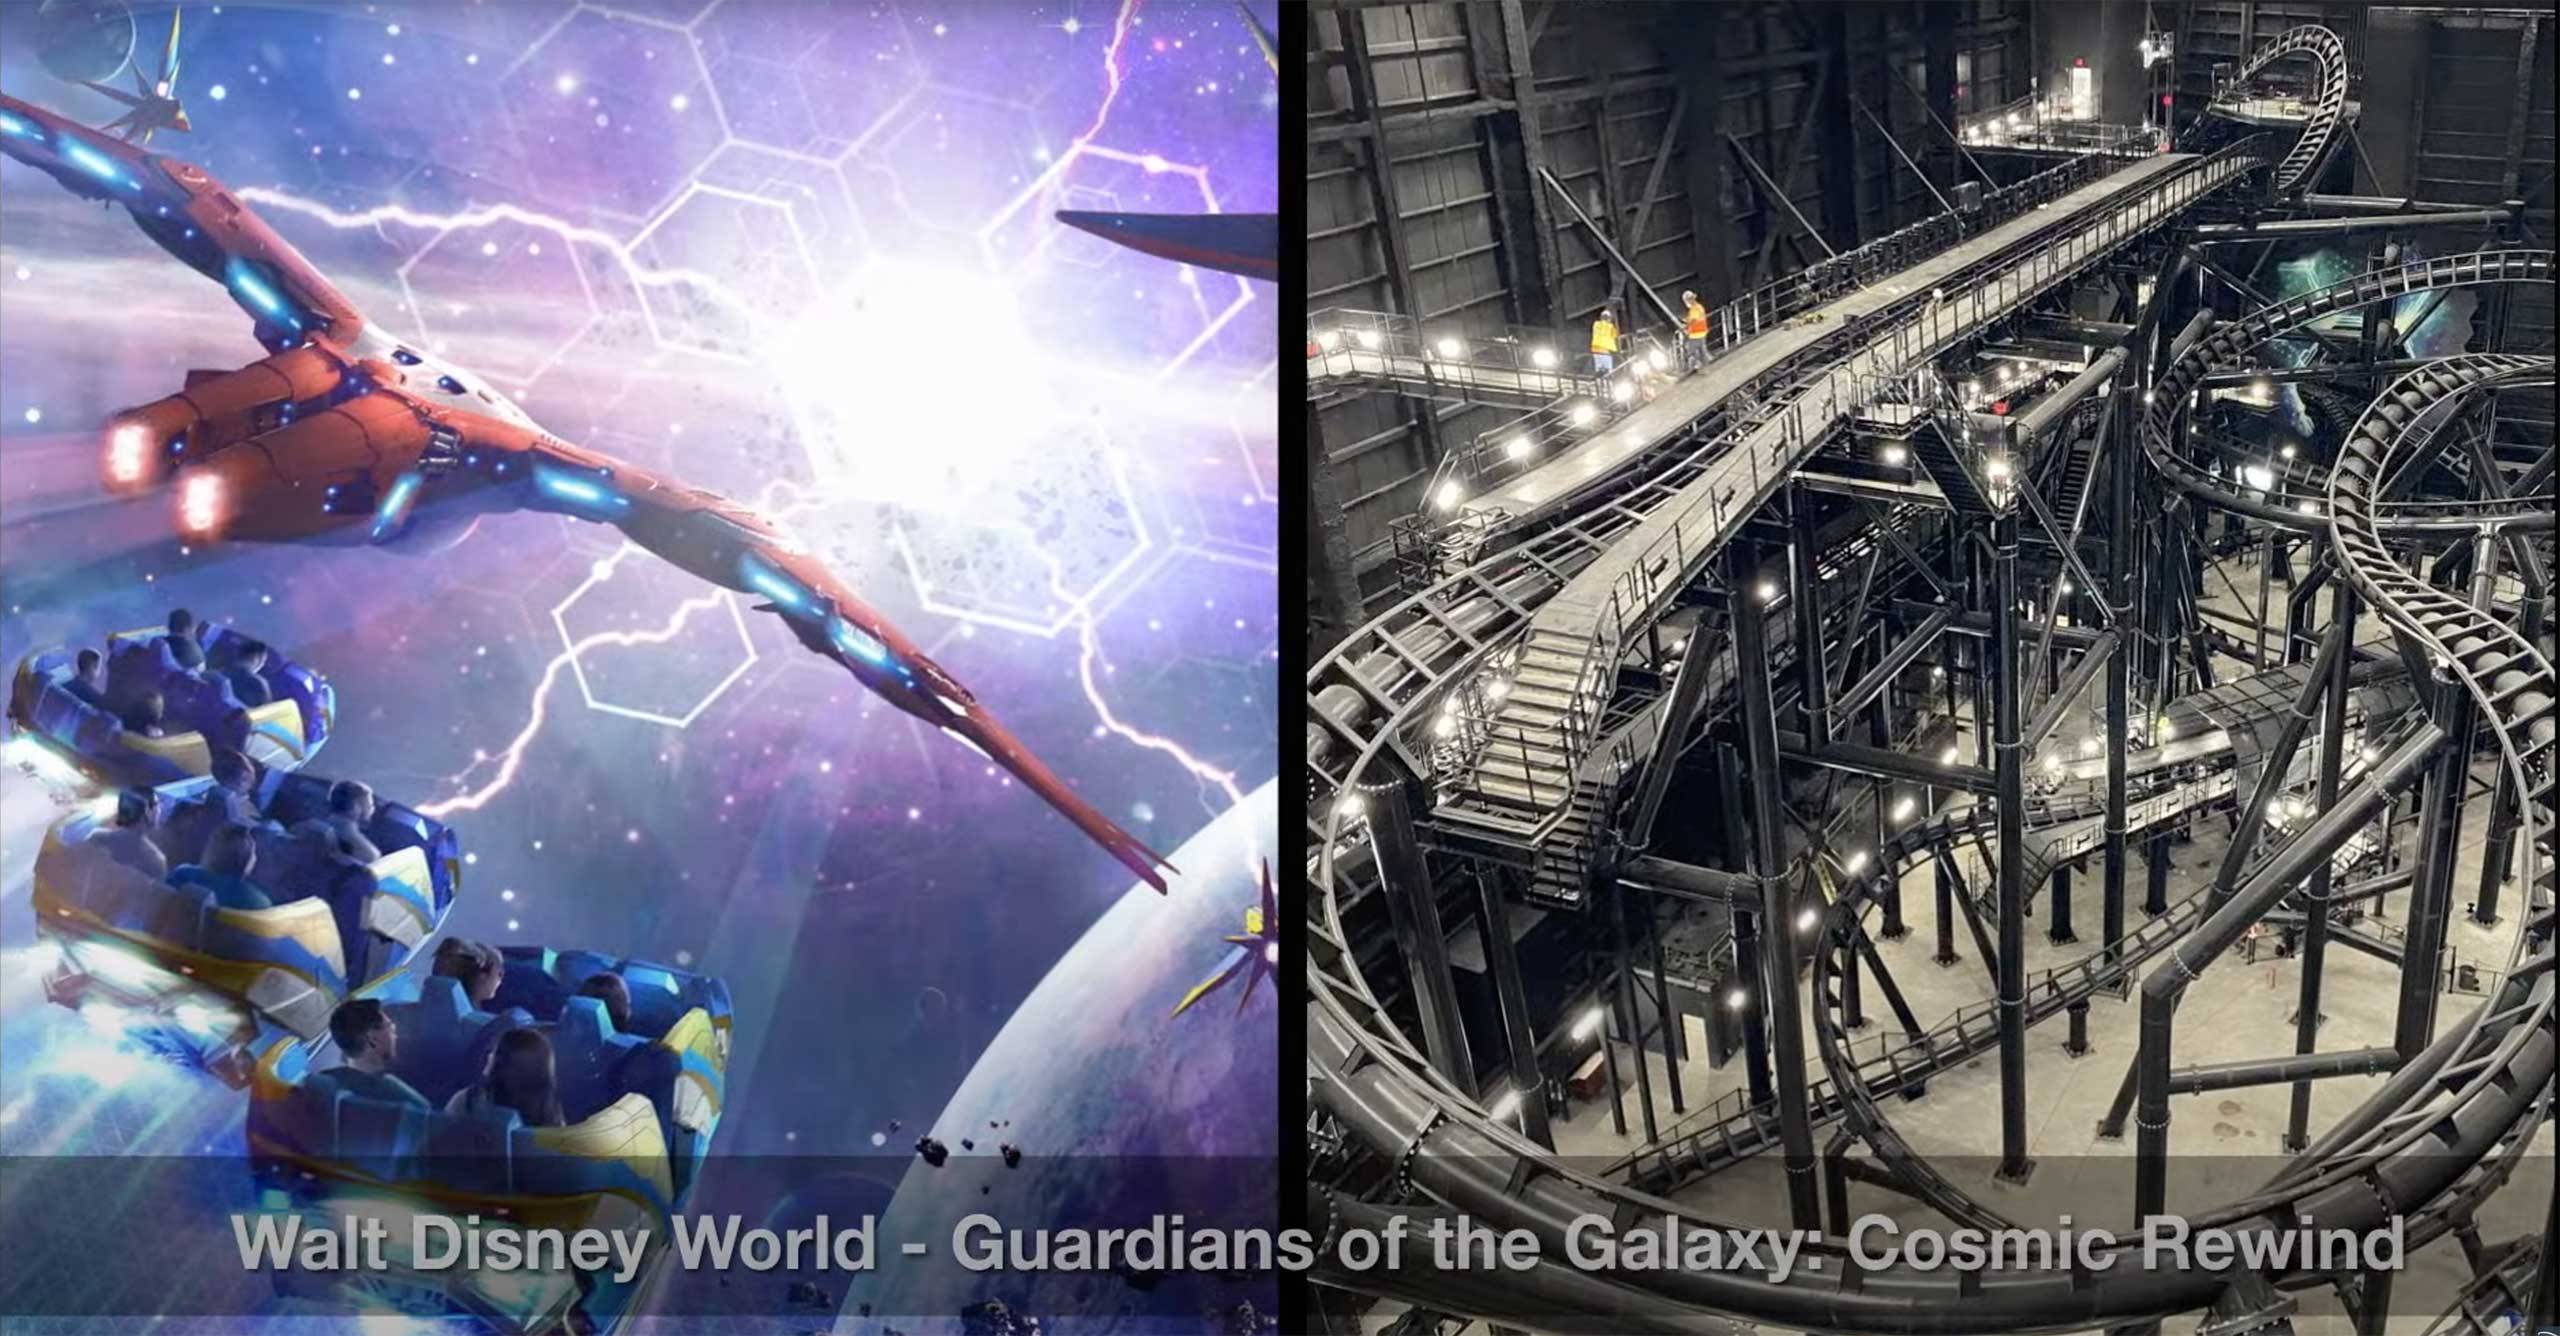 Inside Guardians of the Galaxy Cosmic Rewind show building